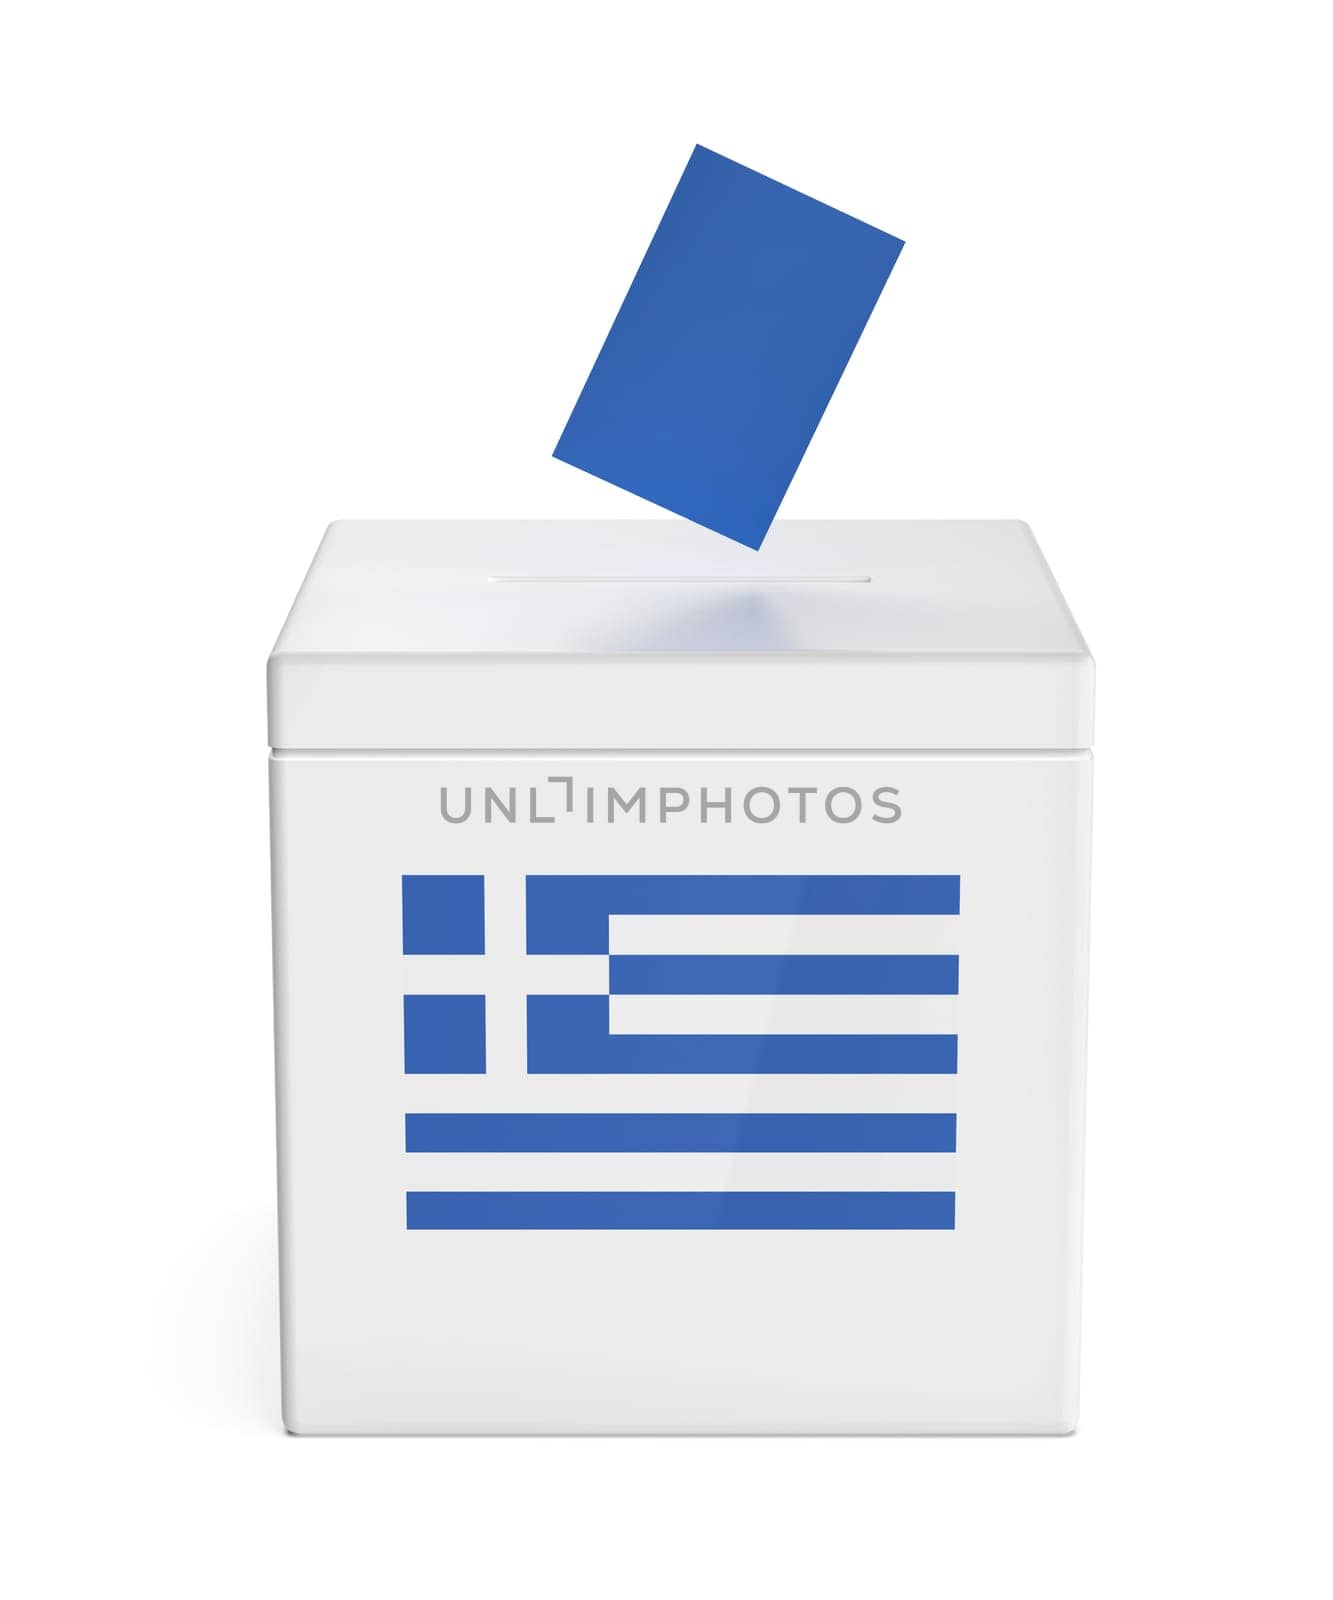 Concept image for elections in Greece by magraphics